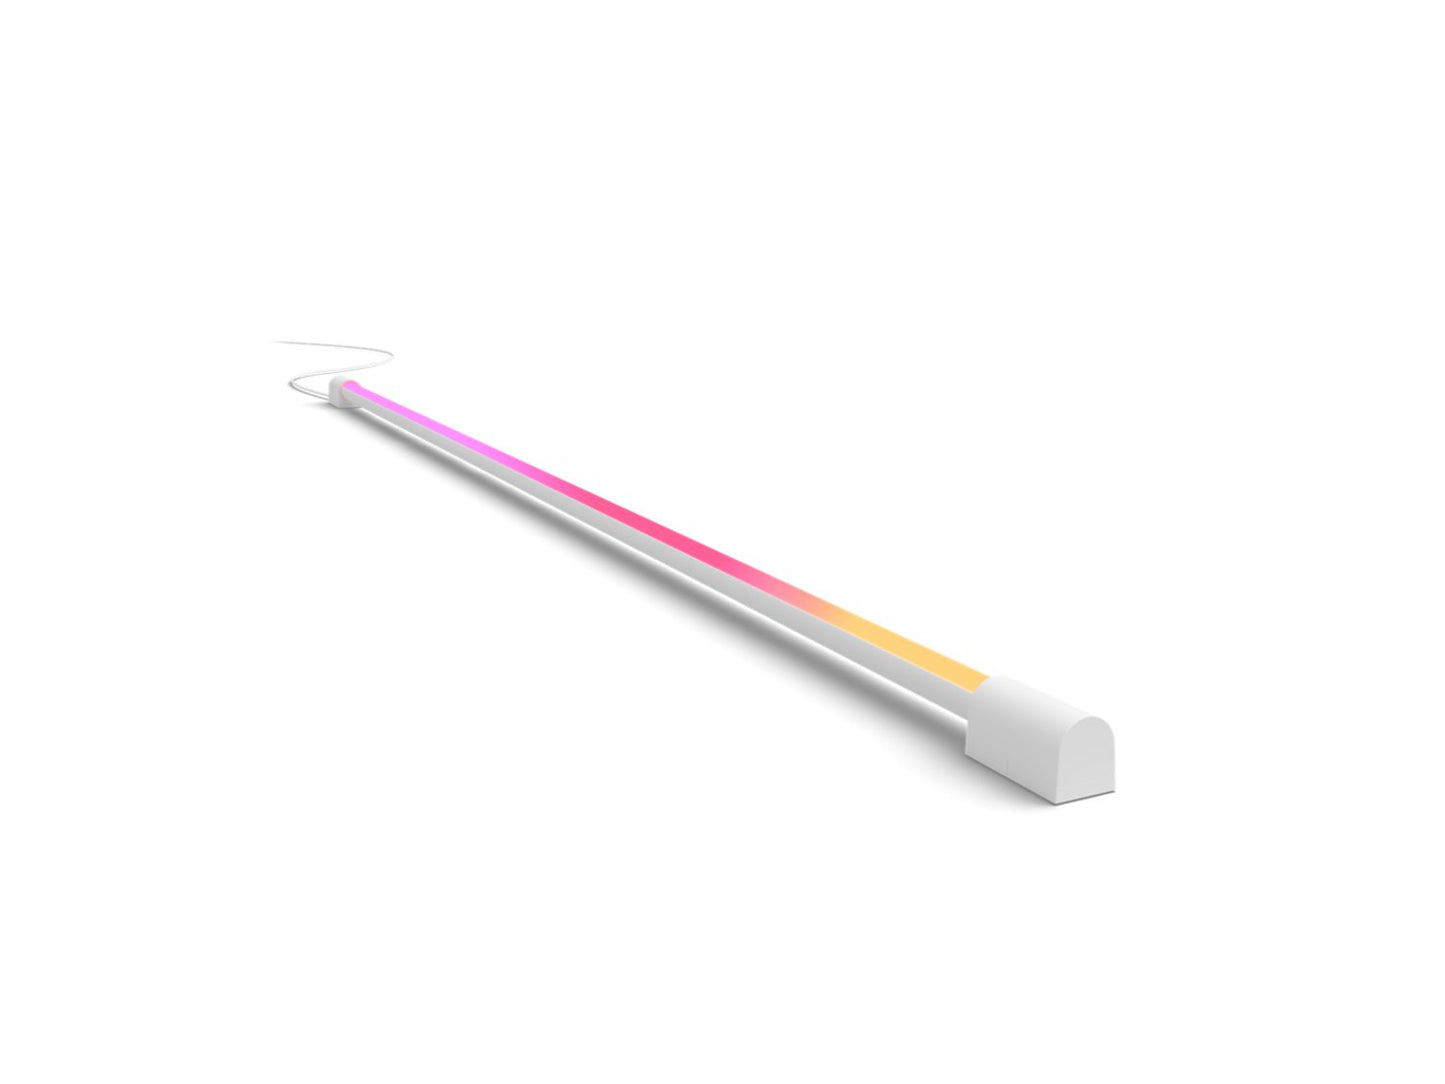 Philips Hue Play Gradient Light Tube 125cm weiss